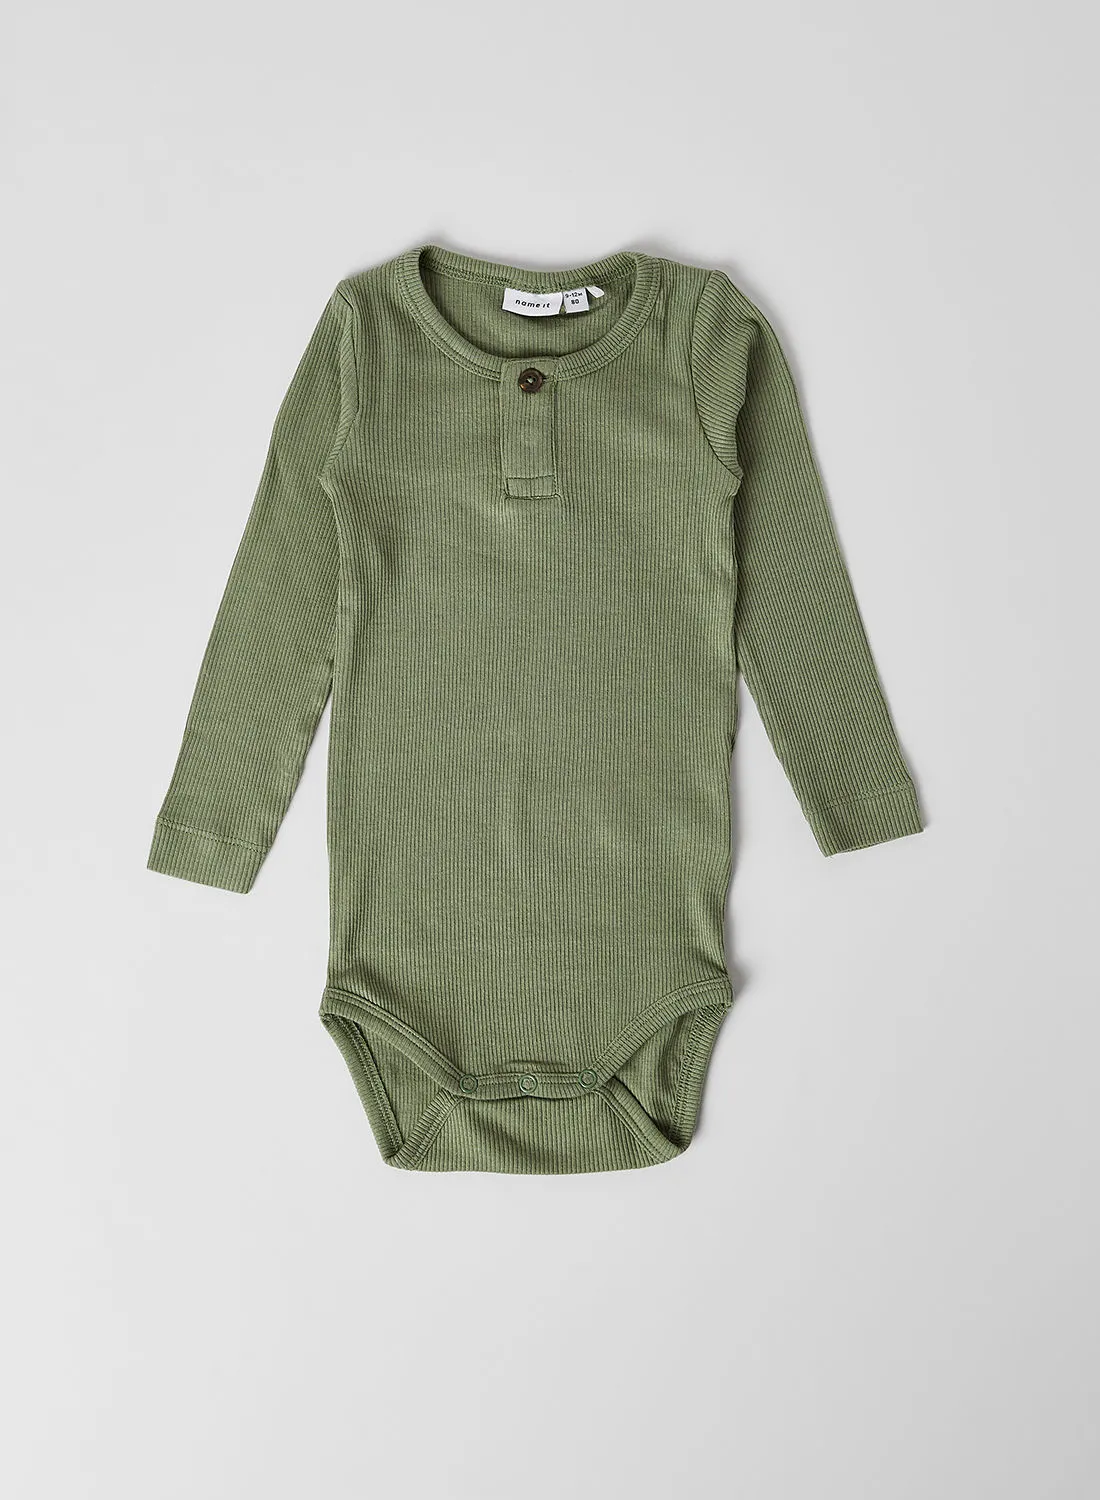 NAME IT Knitted Pattern Henley Neck Onesies Hedge Green